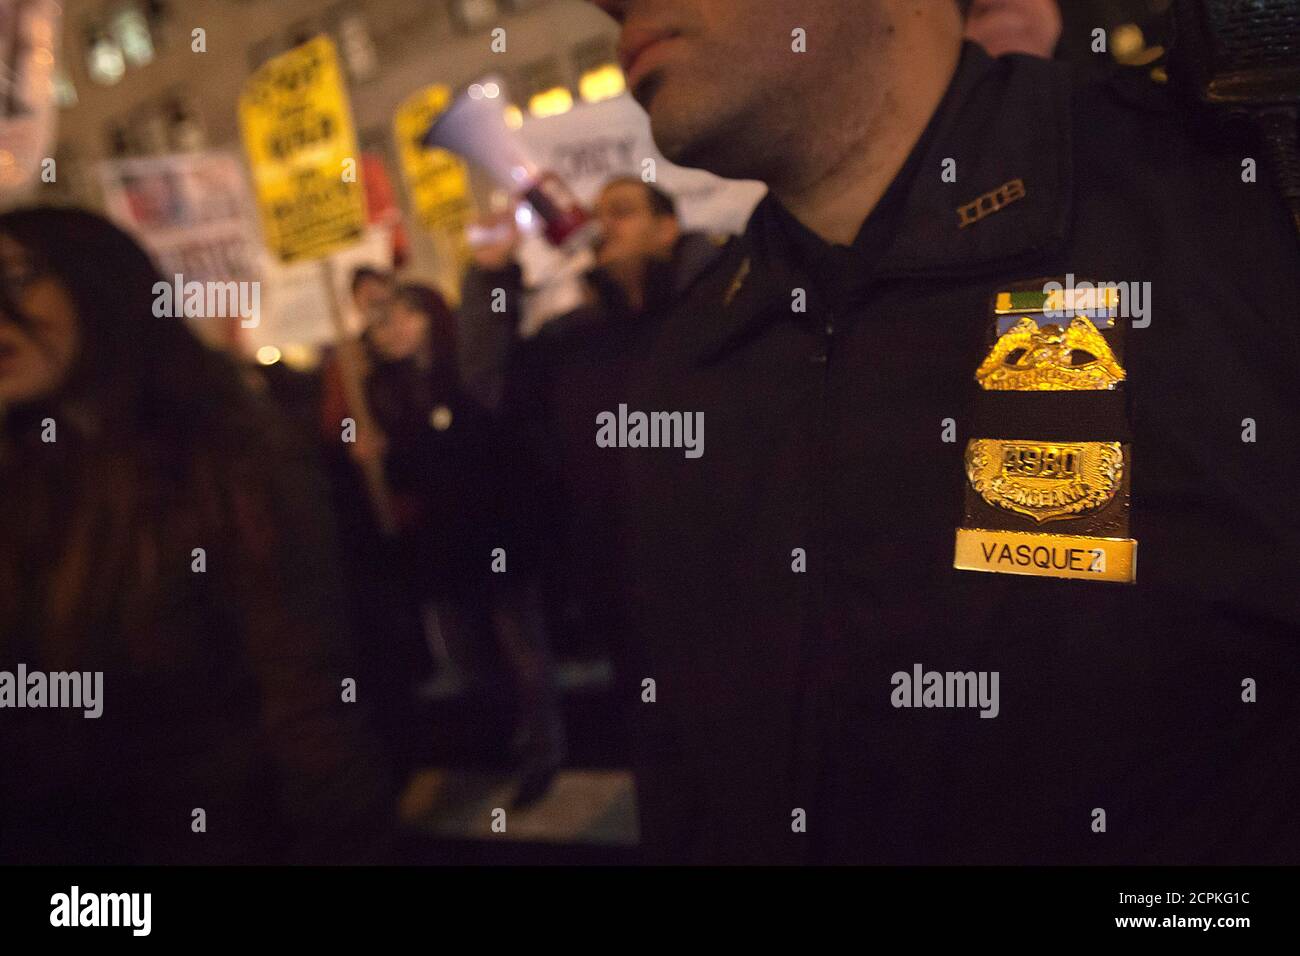 A policeman wearing a mourning band on his badge monitors a protest against the police in the Manhattan borough of New York December 23, 2014.Mayor Bill de Blasio's attempts to soothe a city dismayed by the slaying of two officers were further rebuffed on Tuesday as protesters defied his call to suspend what have become regular demonstrations over excessive police force. REUTERS/Carlo Allegri (UNITED STATES - Tags: CRIME LAW CIVIL UNREST) Stock Photo